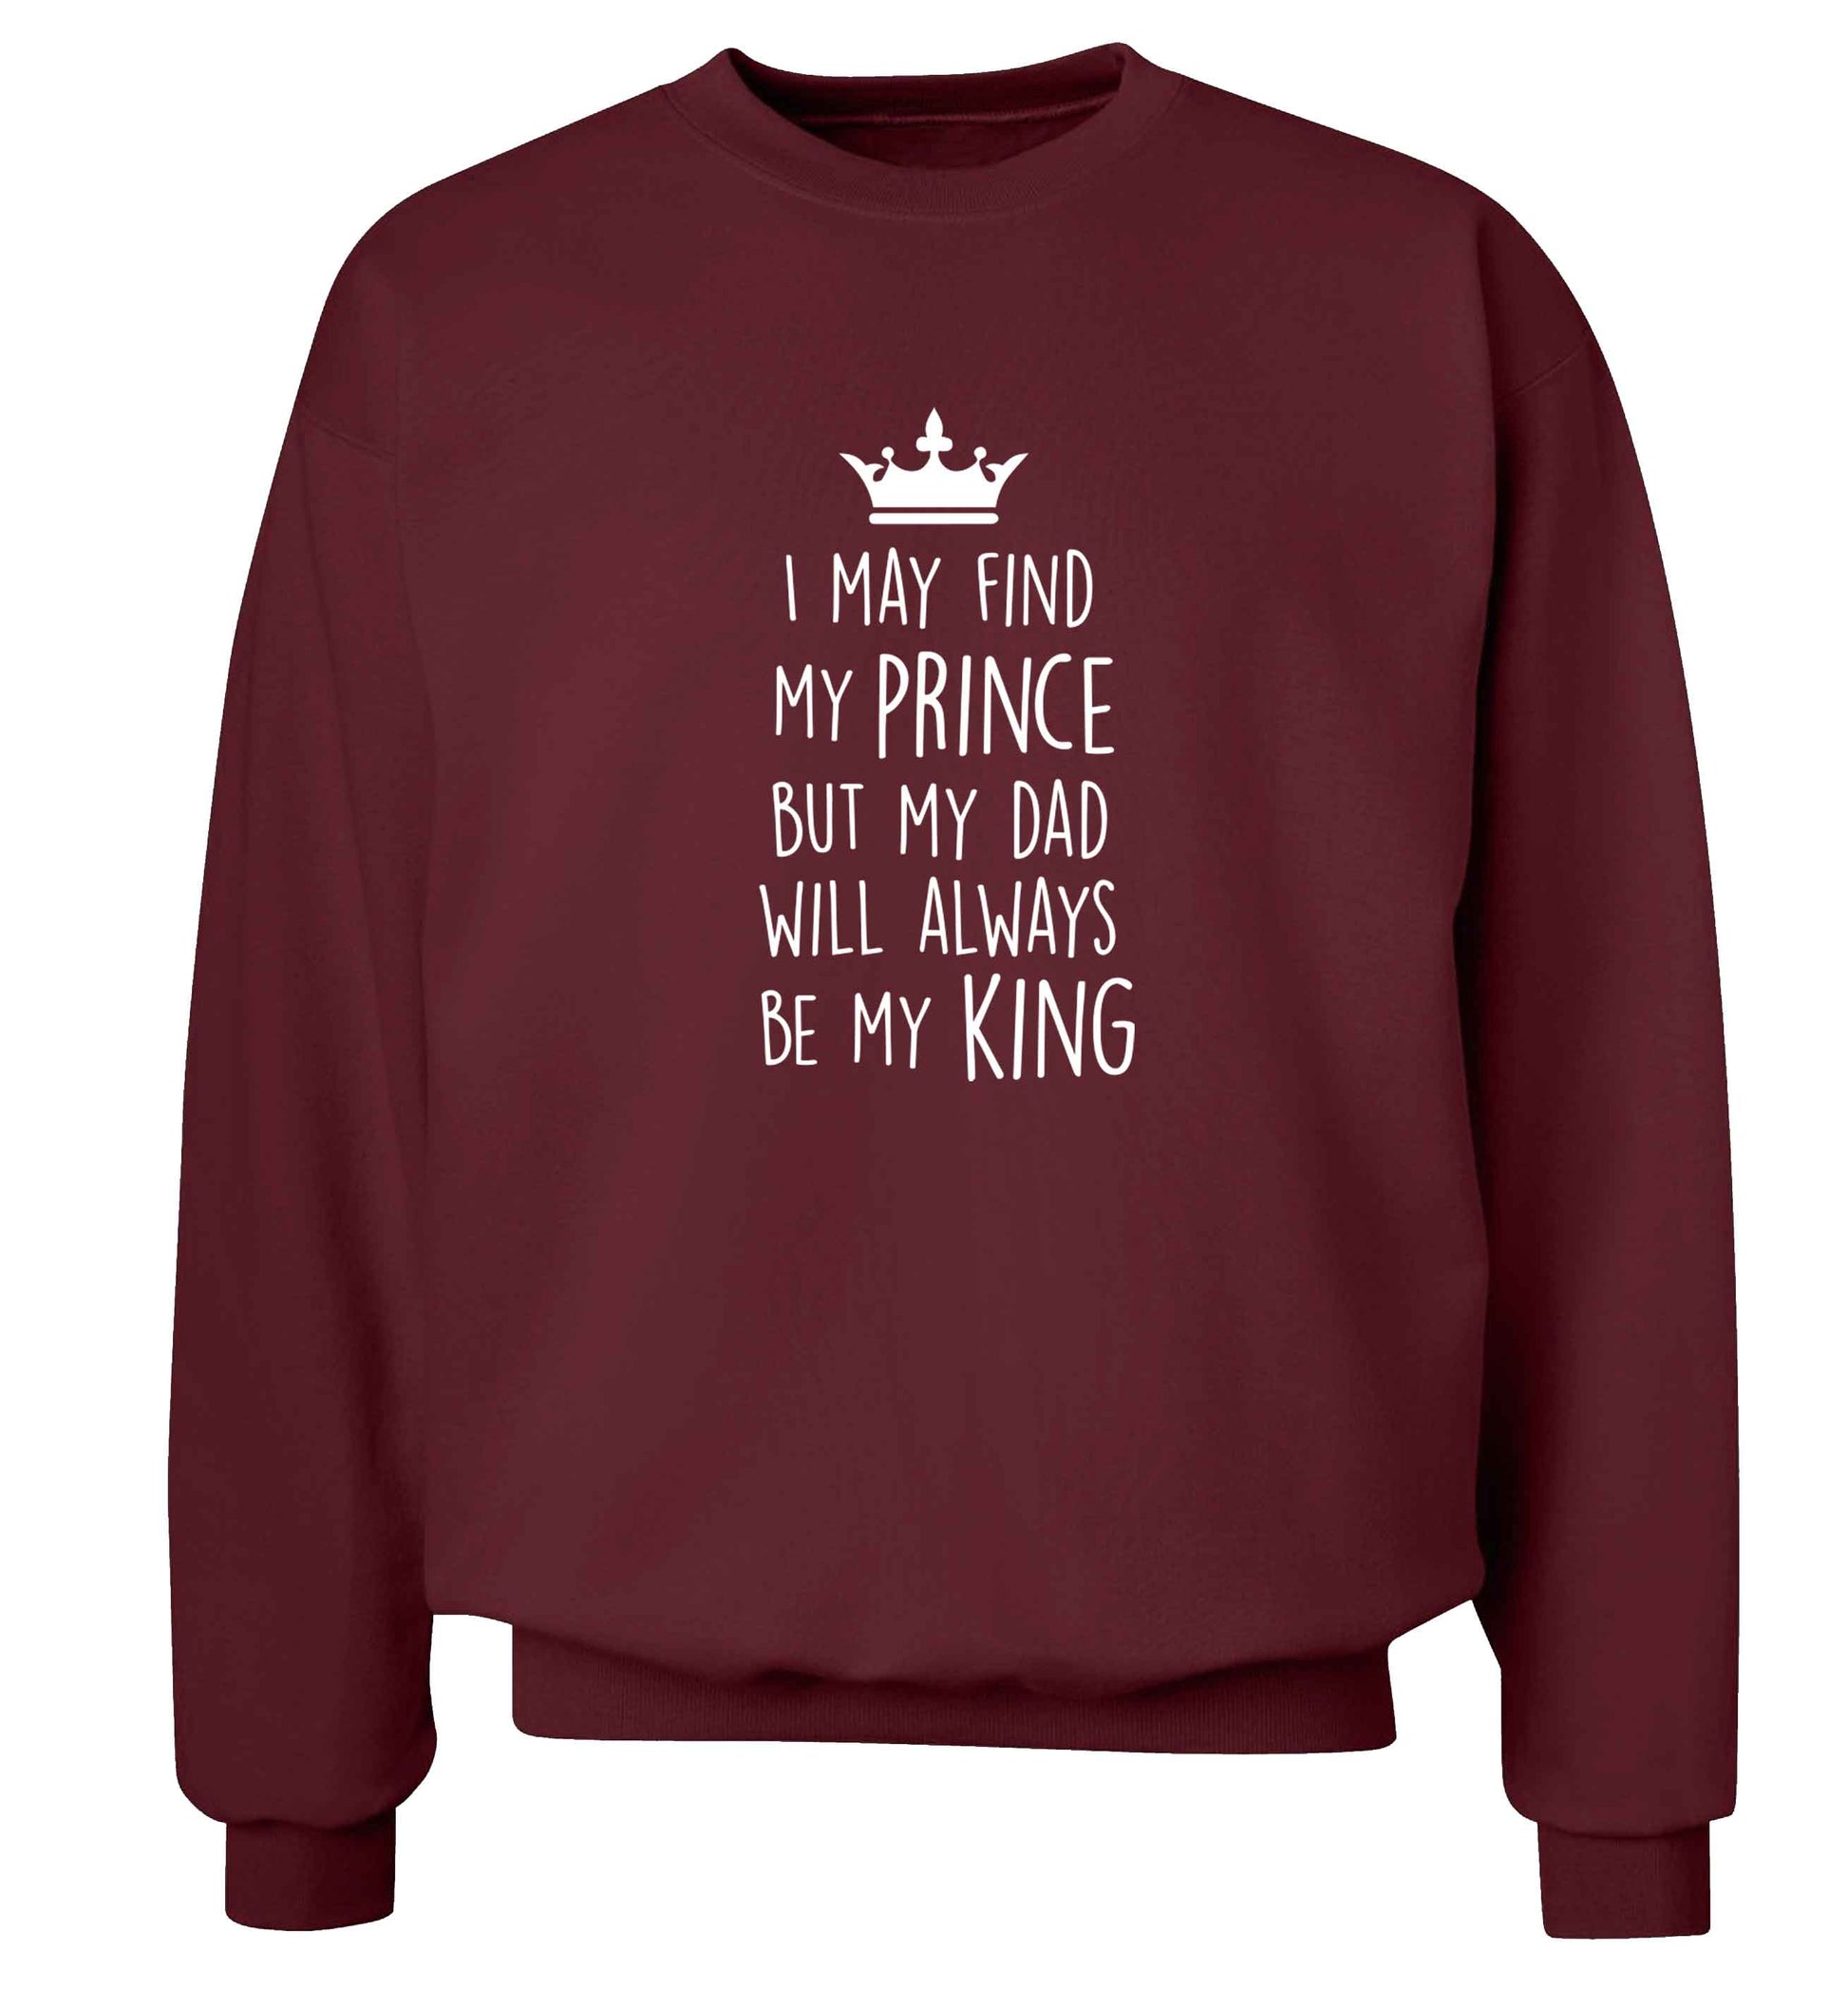 I may find my prince but my dad will always be my king adult's unisex maroon sweater 2XL